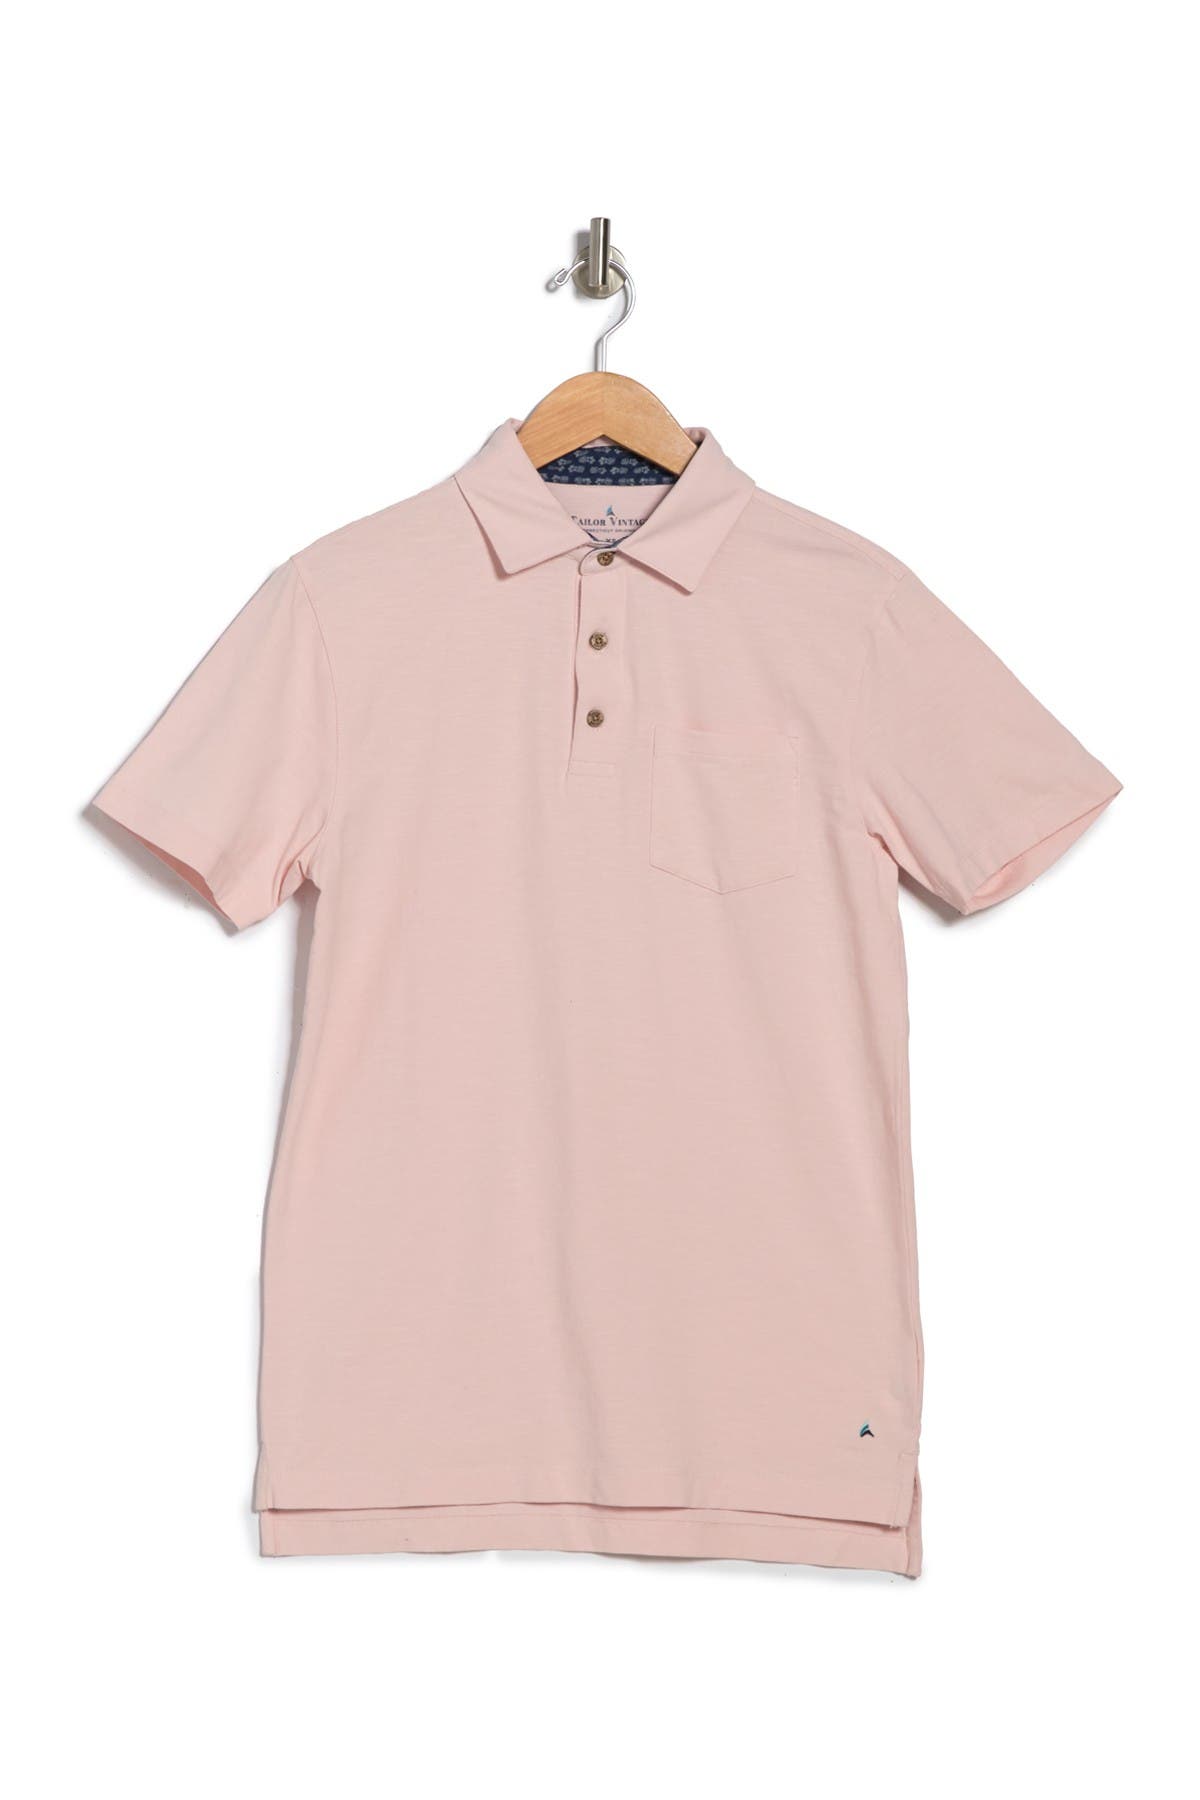 Tailor Vintage Airotec Stretch Slub Jersey Short Sleeve Polo In Light/pastel Pink1